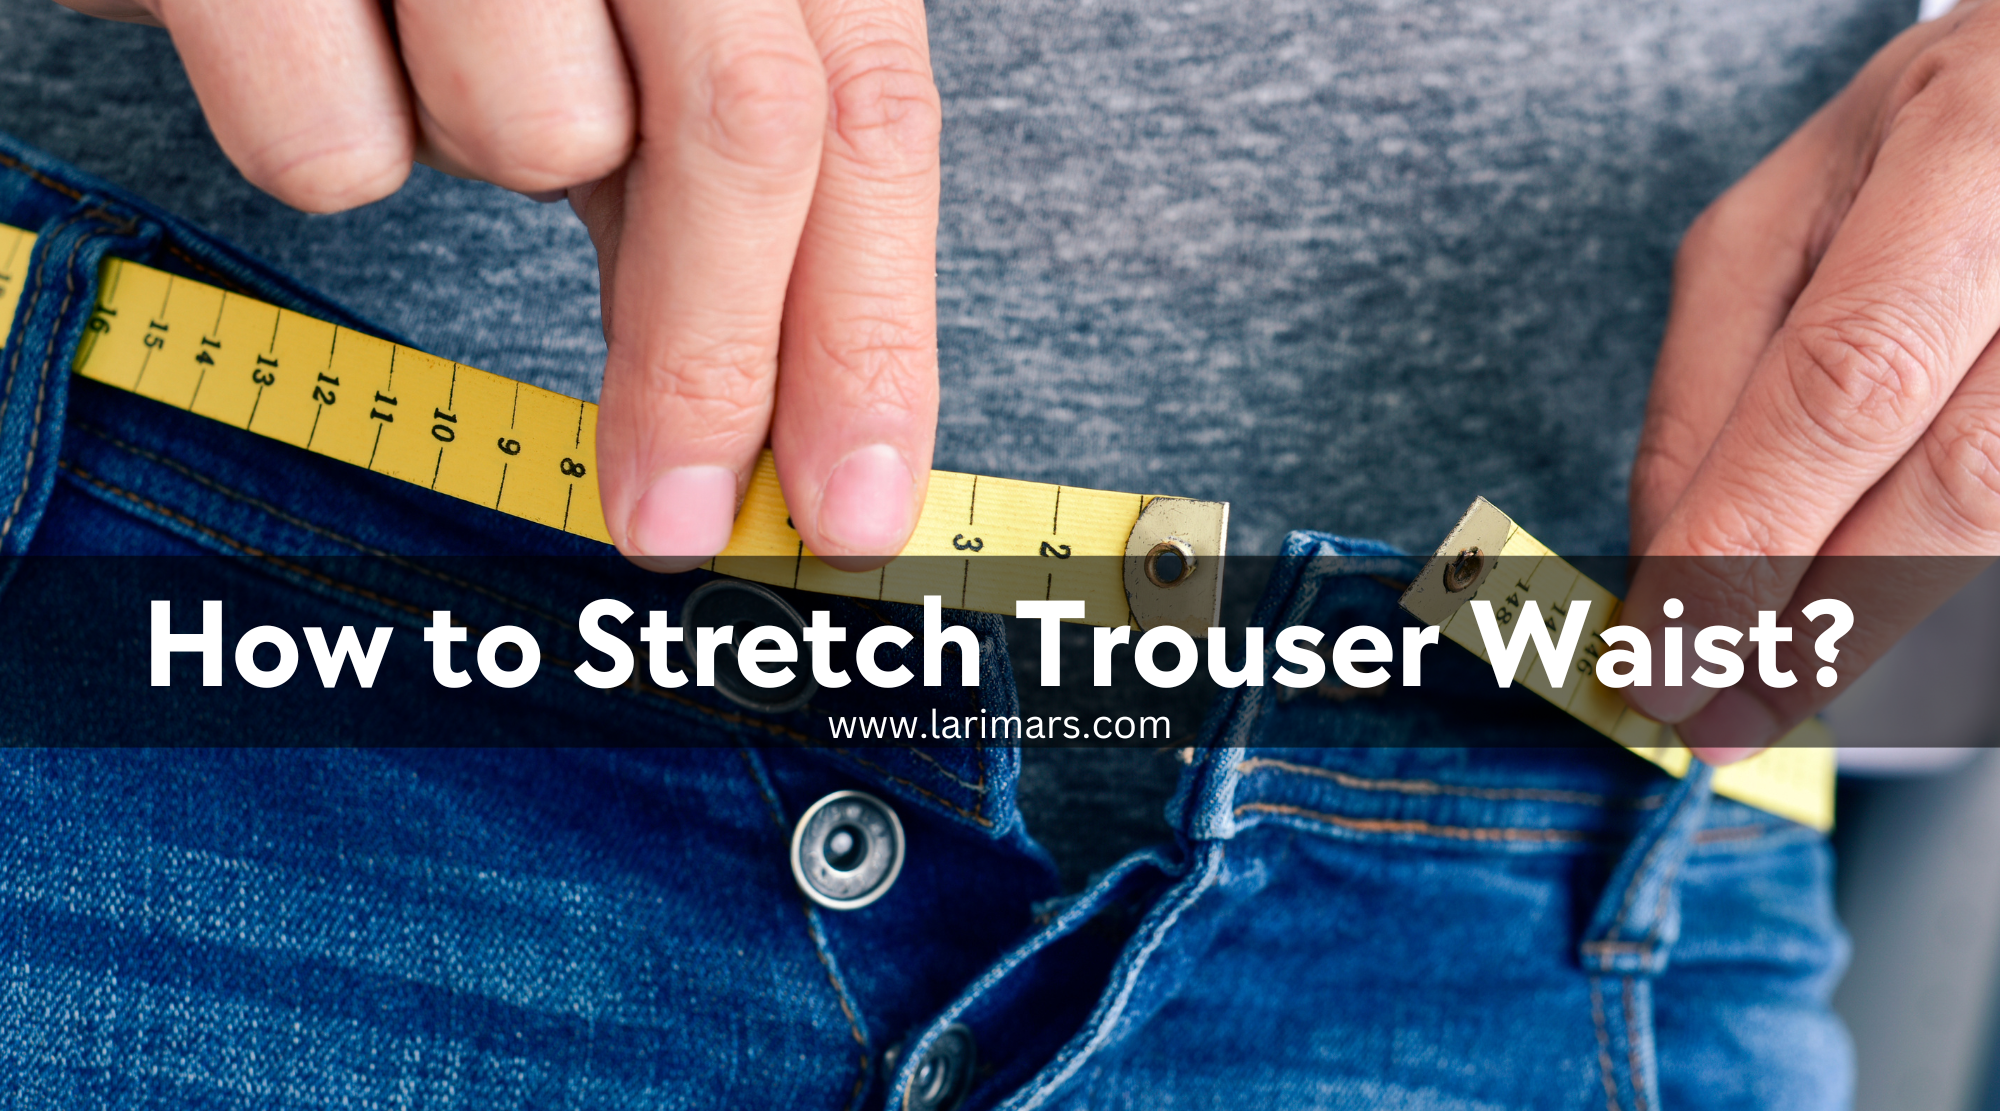 How to Stretch Trouser Waist? [Full Guide]